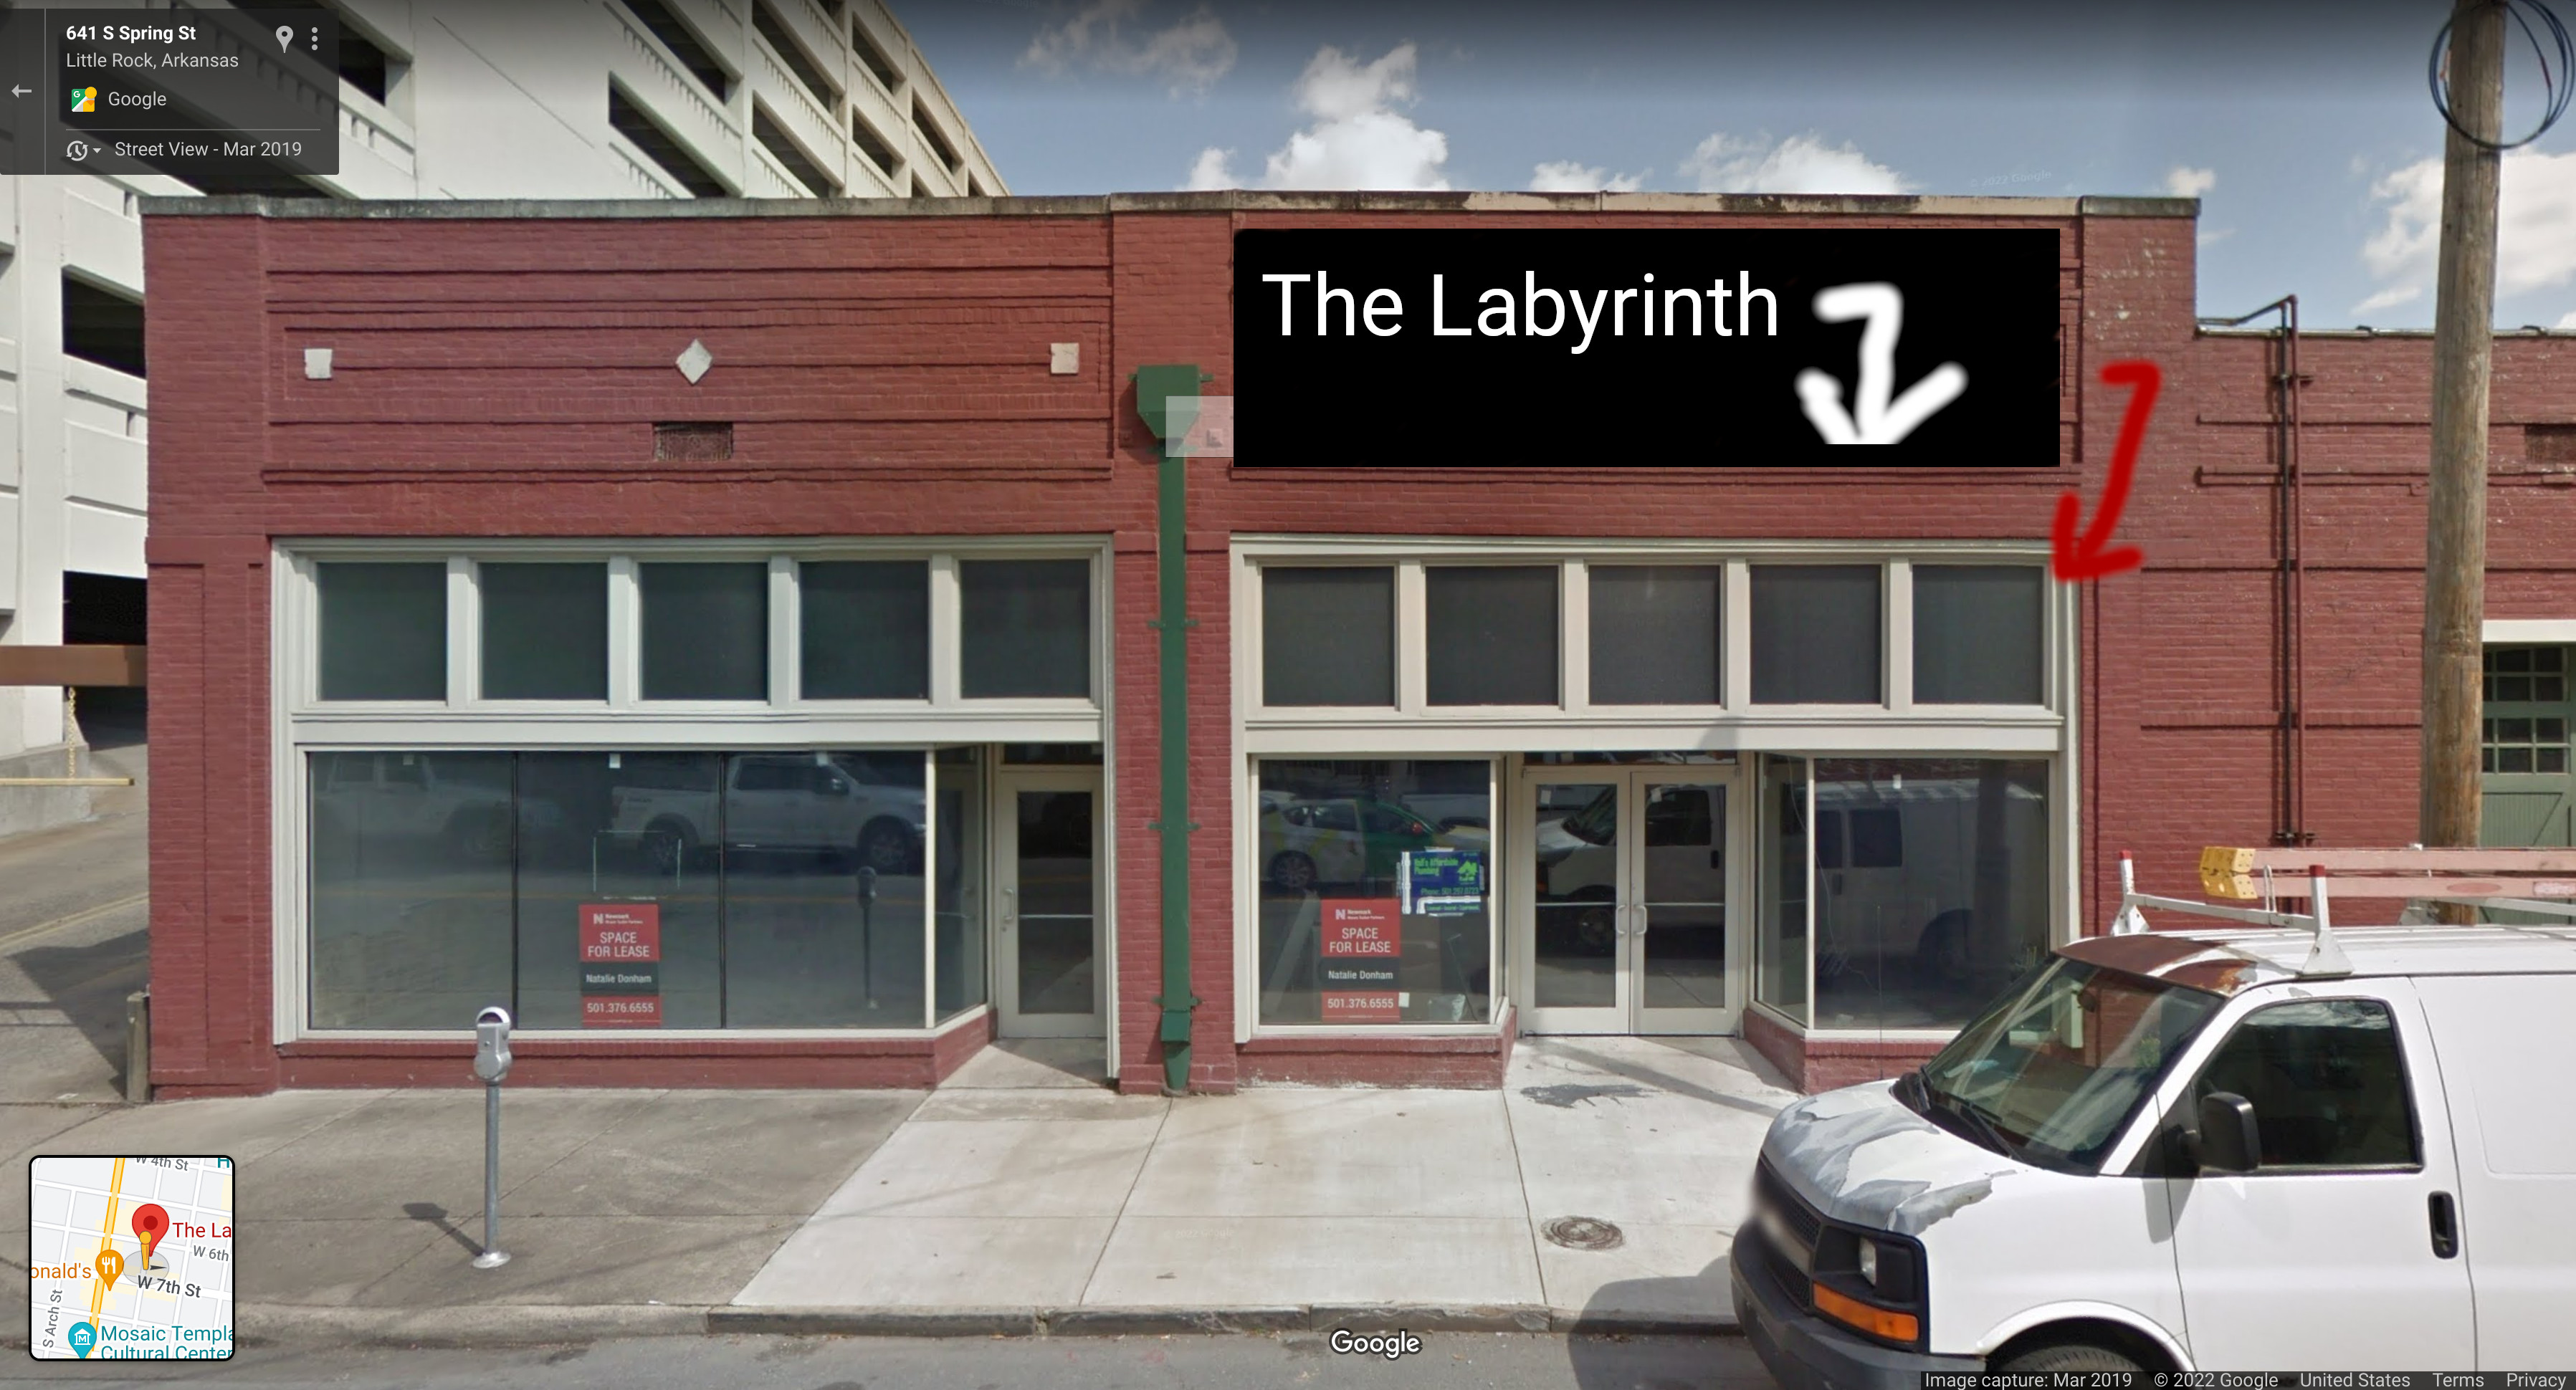 This is a modified Google Street View image showing the location of The Labyrinth. The Labyrinth is on the right hand side of the building. The place next to it in the photo is empty but it&rsquo;s currently the Electric Panther Tattoo Shop.